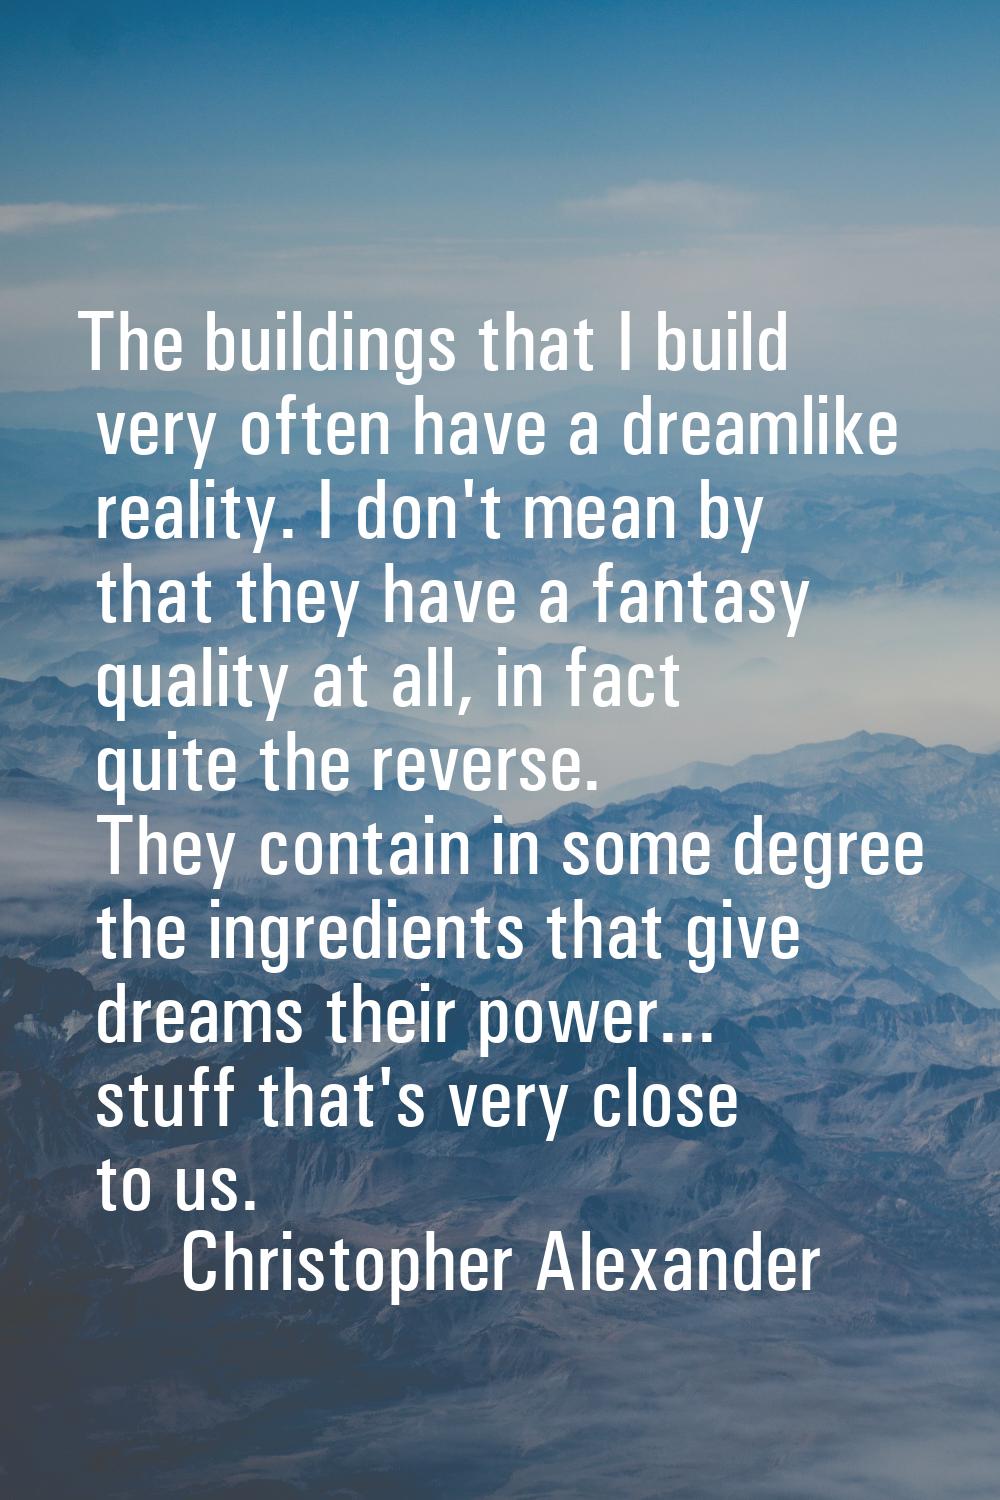 The buildings that I build very often have a dreamlike reality. I don't mean by that they have a fa